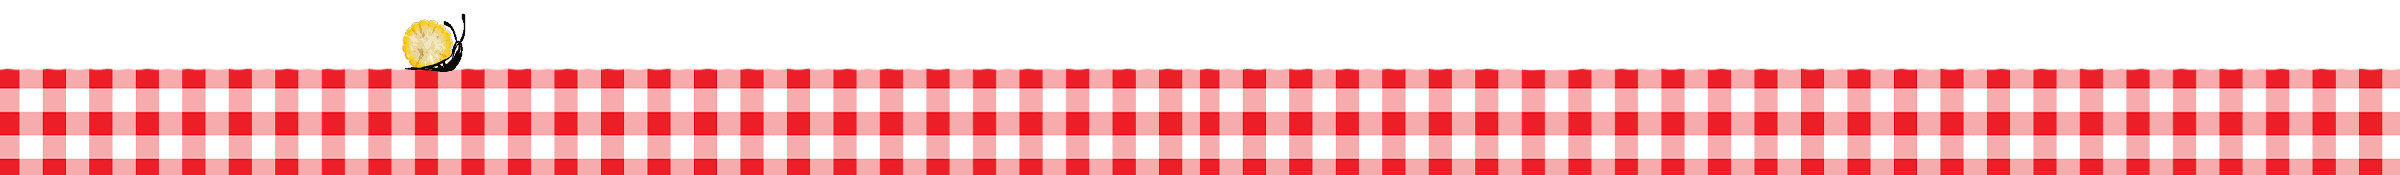 red and white gingham